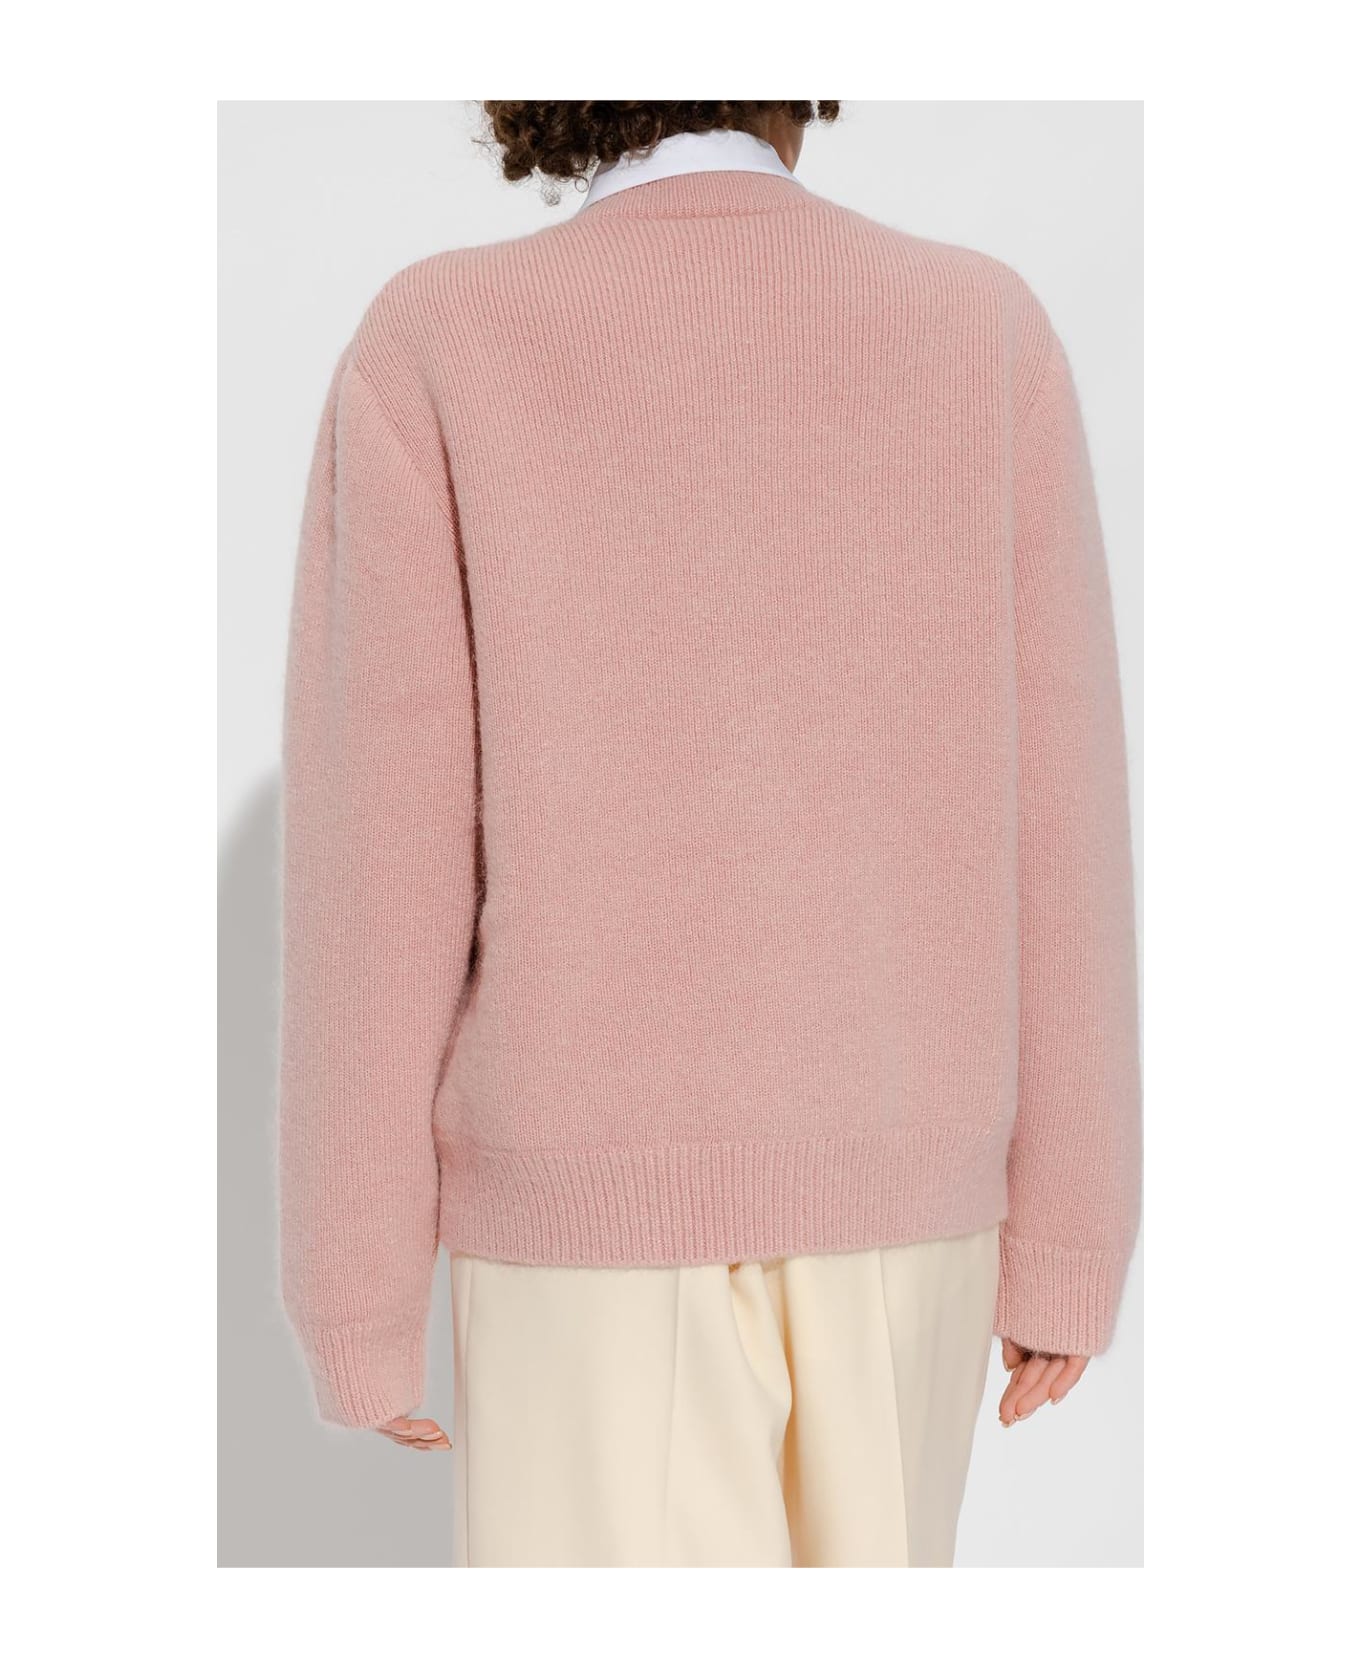 Burberry Insulated Sweater With Appliquès - Rosy pink